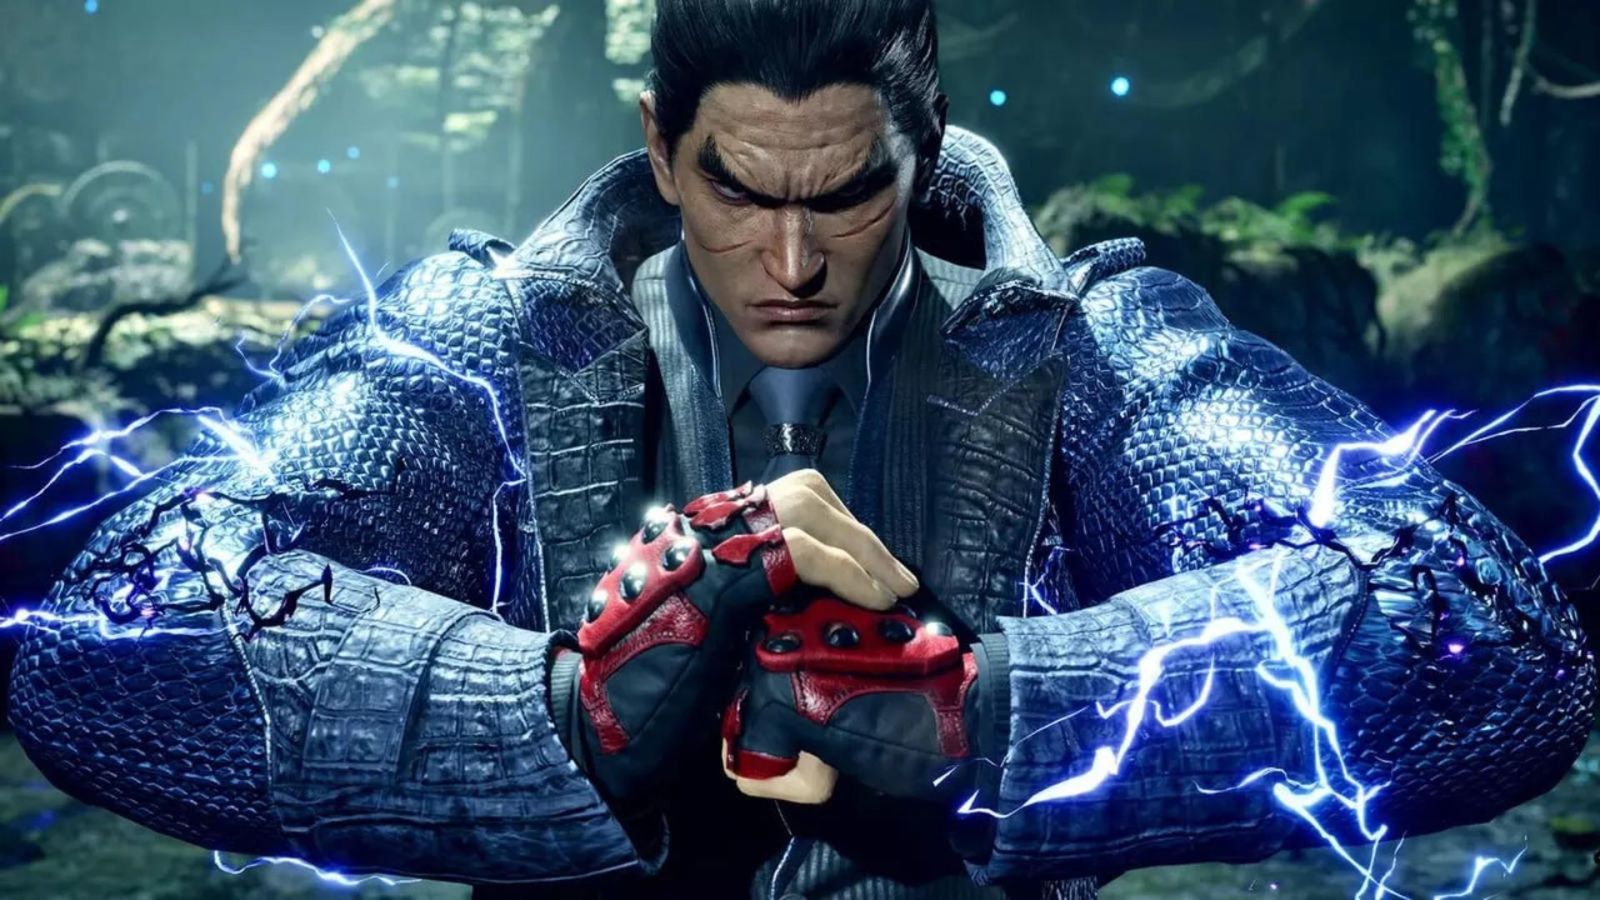 Kazuya Mishima cracking his knuckles as he gets ready for a battle in Tekken 8